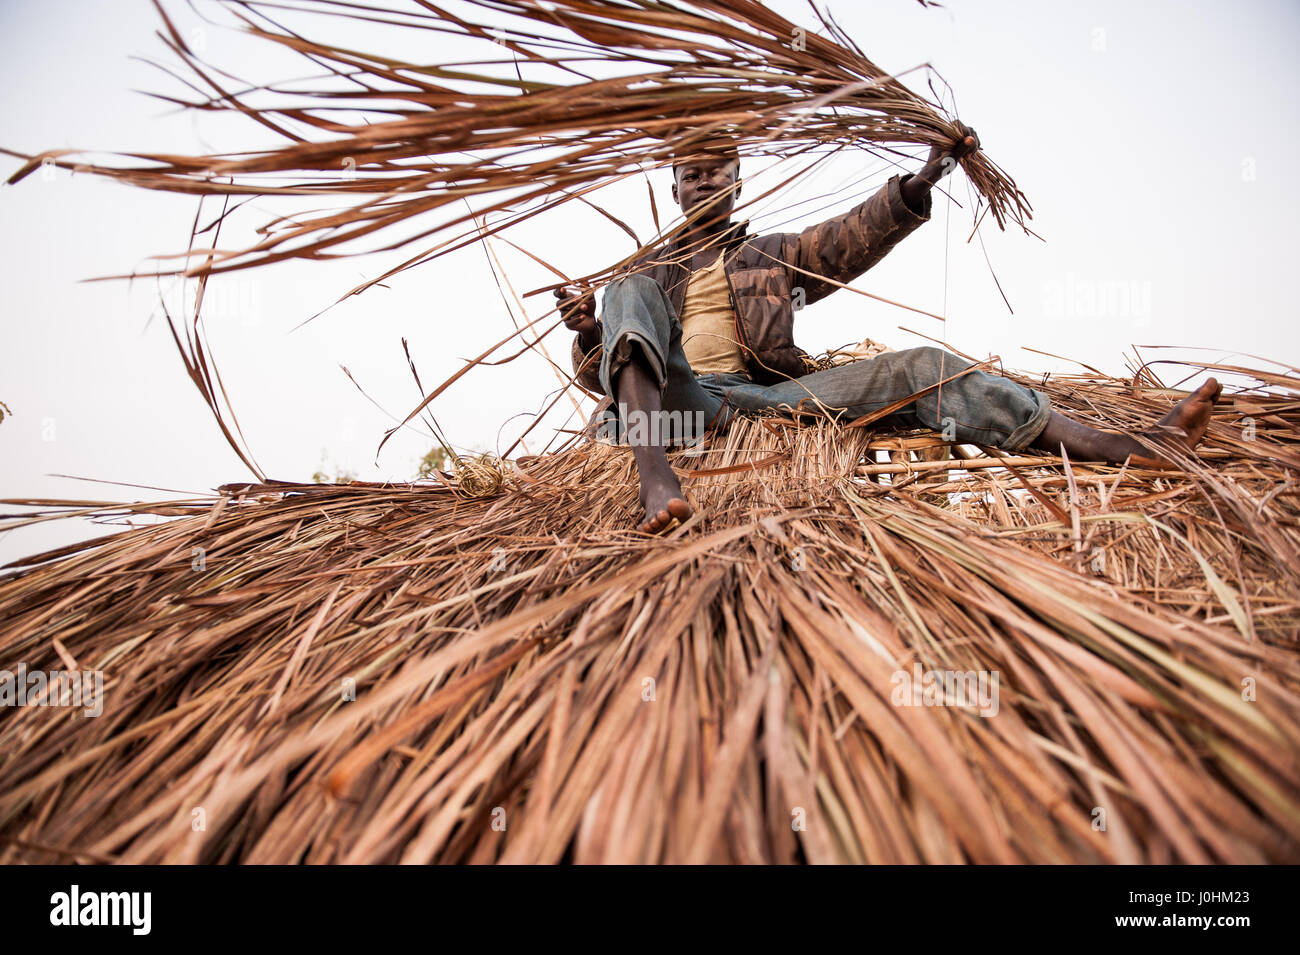 Thatching a traditional mud and straw dwelling in Dungu, Haut-Uele Province, Democratic Republic of Congo (DRC) Stock Photo